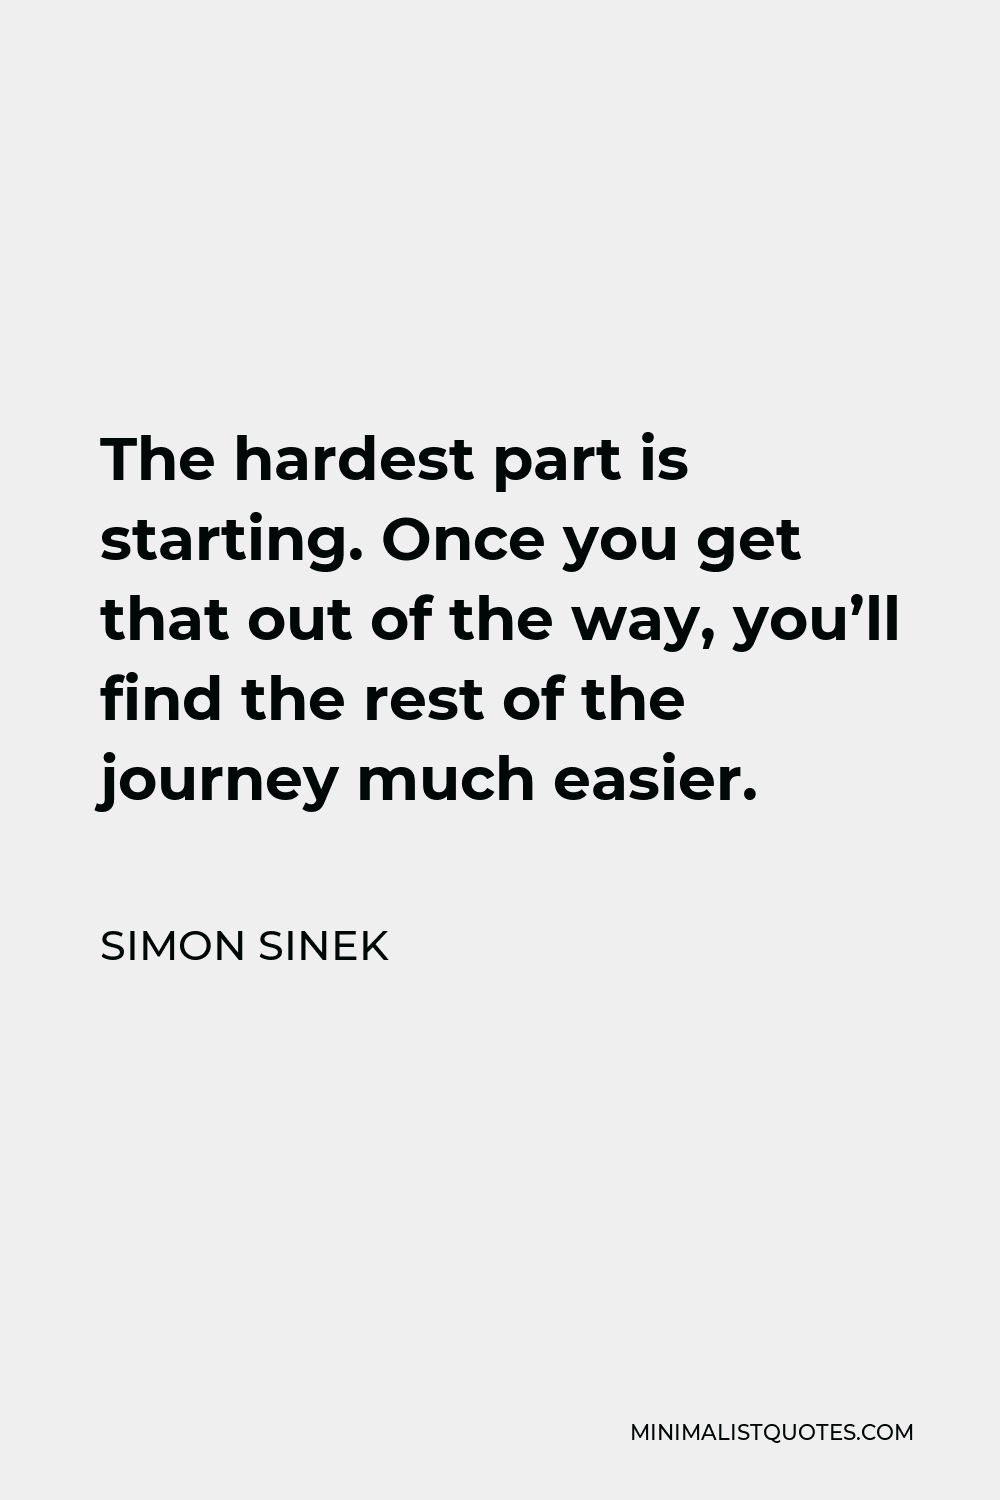 Simon Sinek Quote - The hardest part is starting. Once you get that out of the way, you’ll find the rest of the journey much easier.